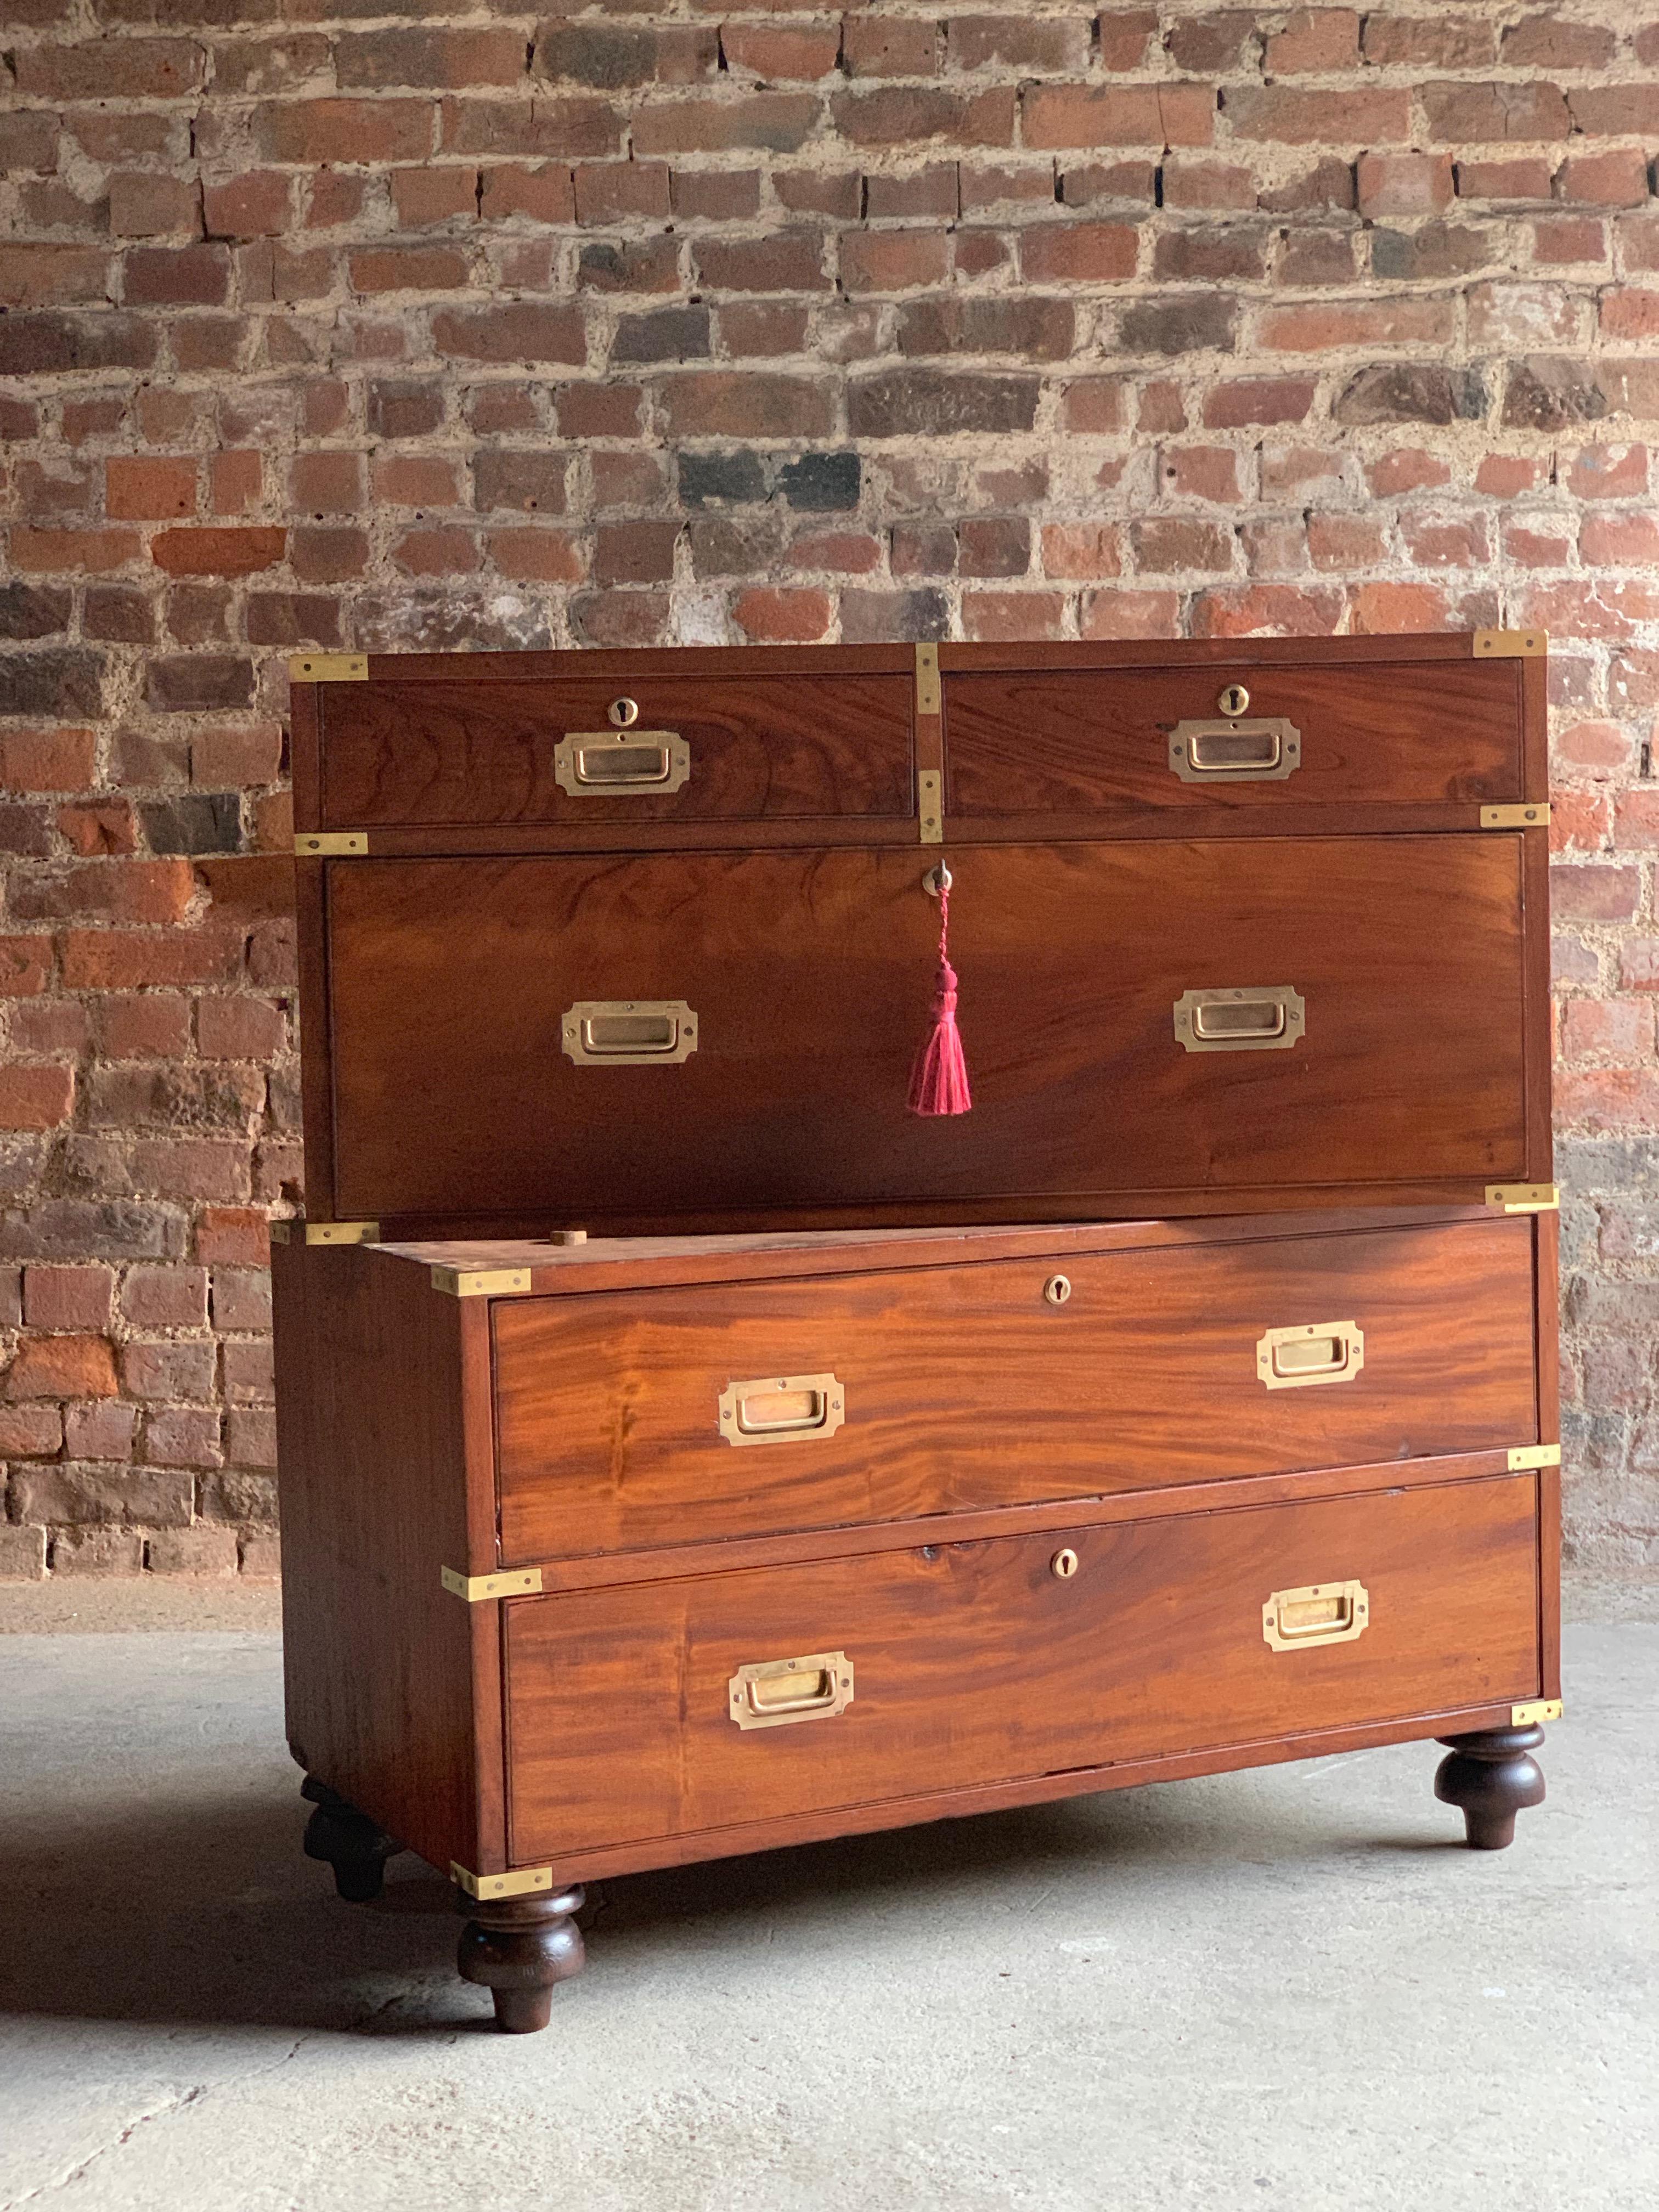 Military Campaign chest of drawers mahogany Victorian, circa 1850 No.12

Magnificent fully restored, 19th century Military mahogany Campaign chest of drawers, circa 1850, The upper section with two short drawers over single large drawer, the lower